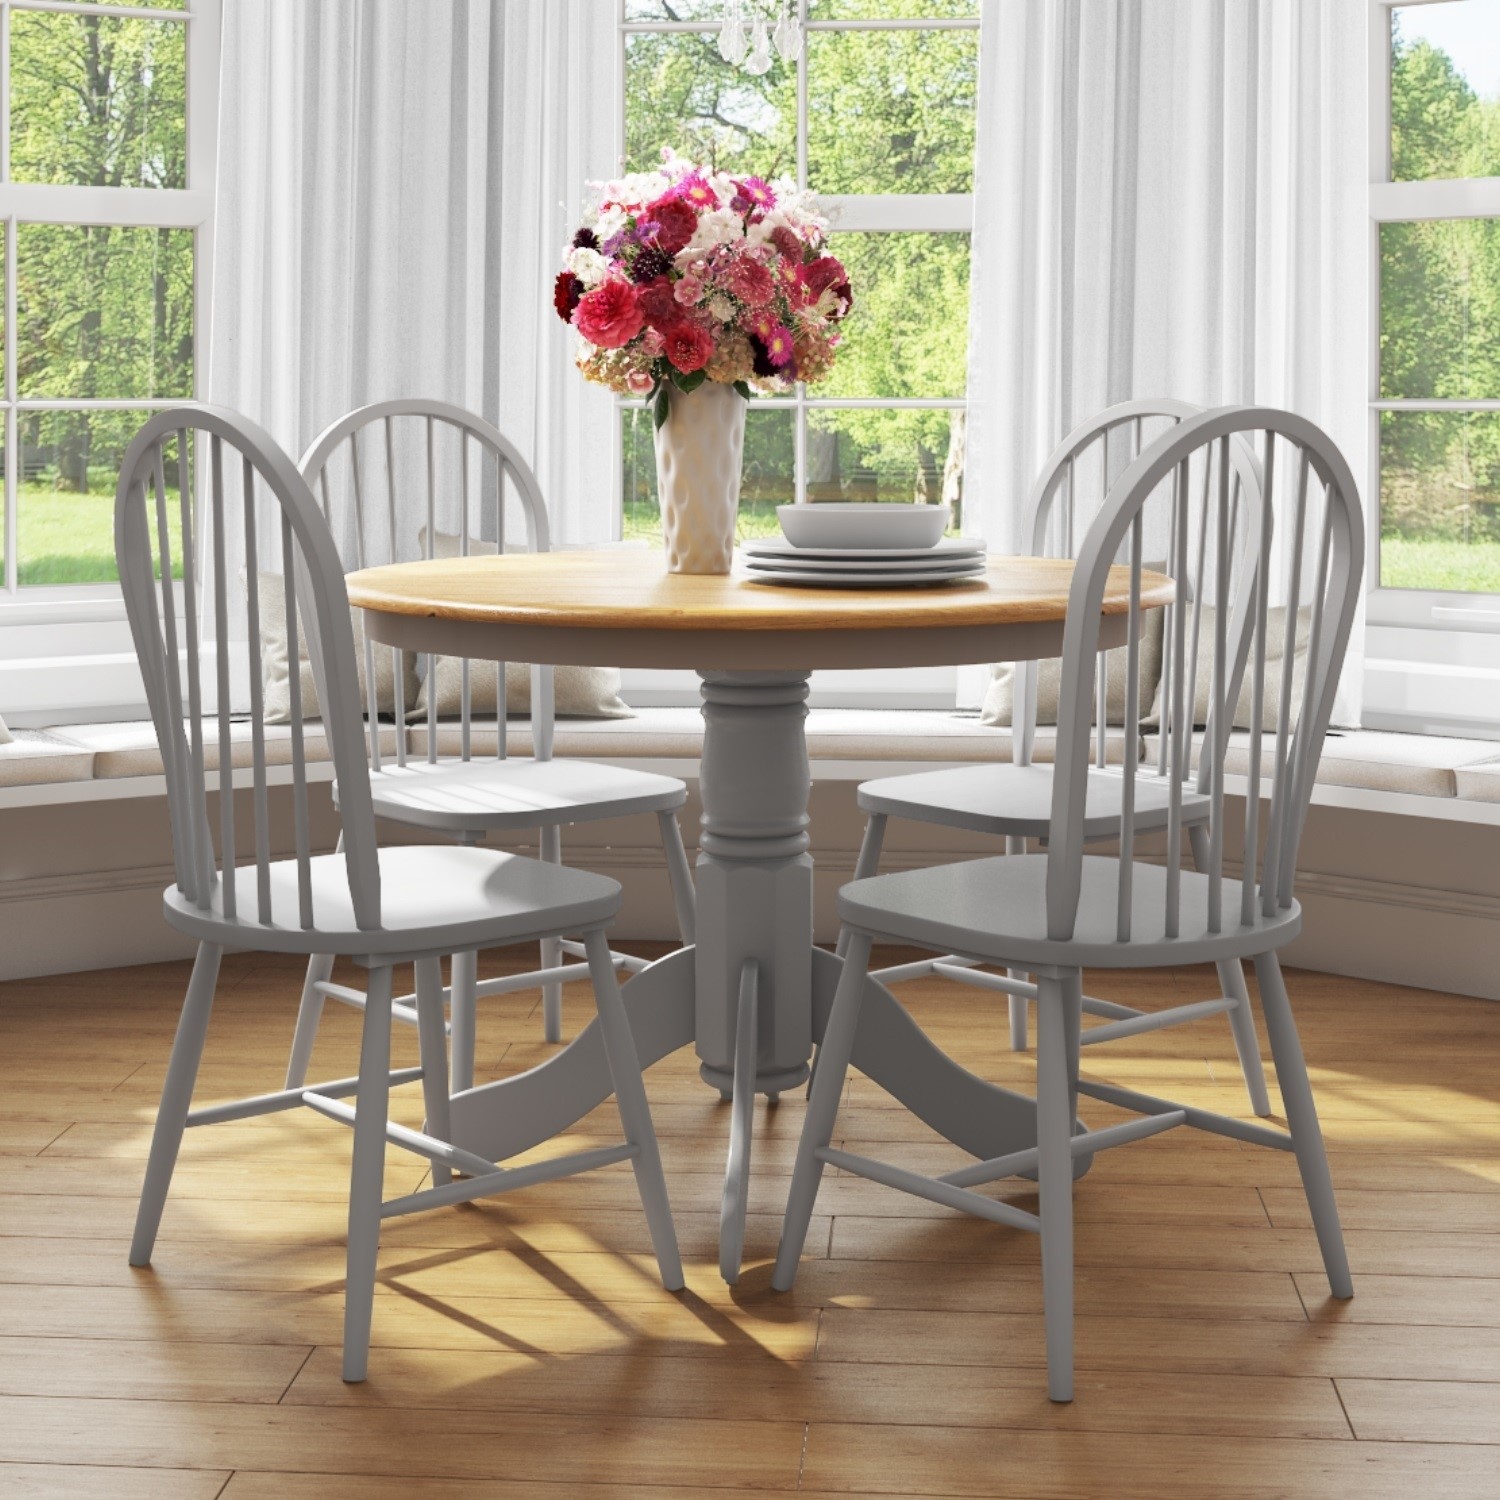 22 Small Round Dining Table Dimensions, Small Round Dining Table And Chairs For 4